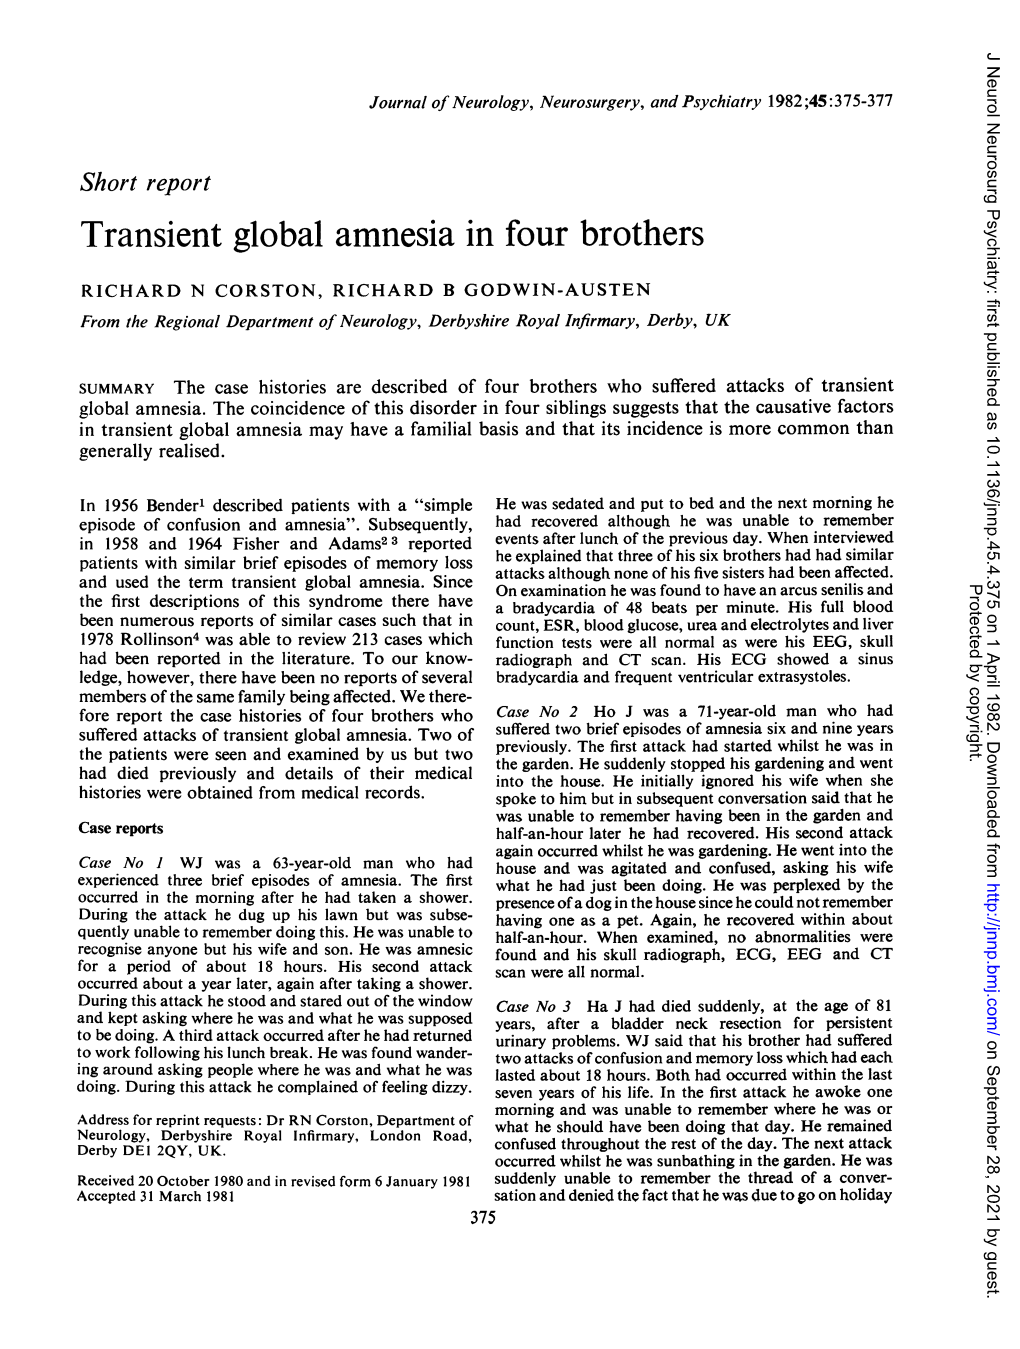 Transient Global Amnesia in Four Brothers